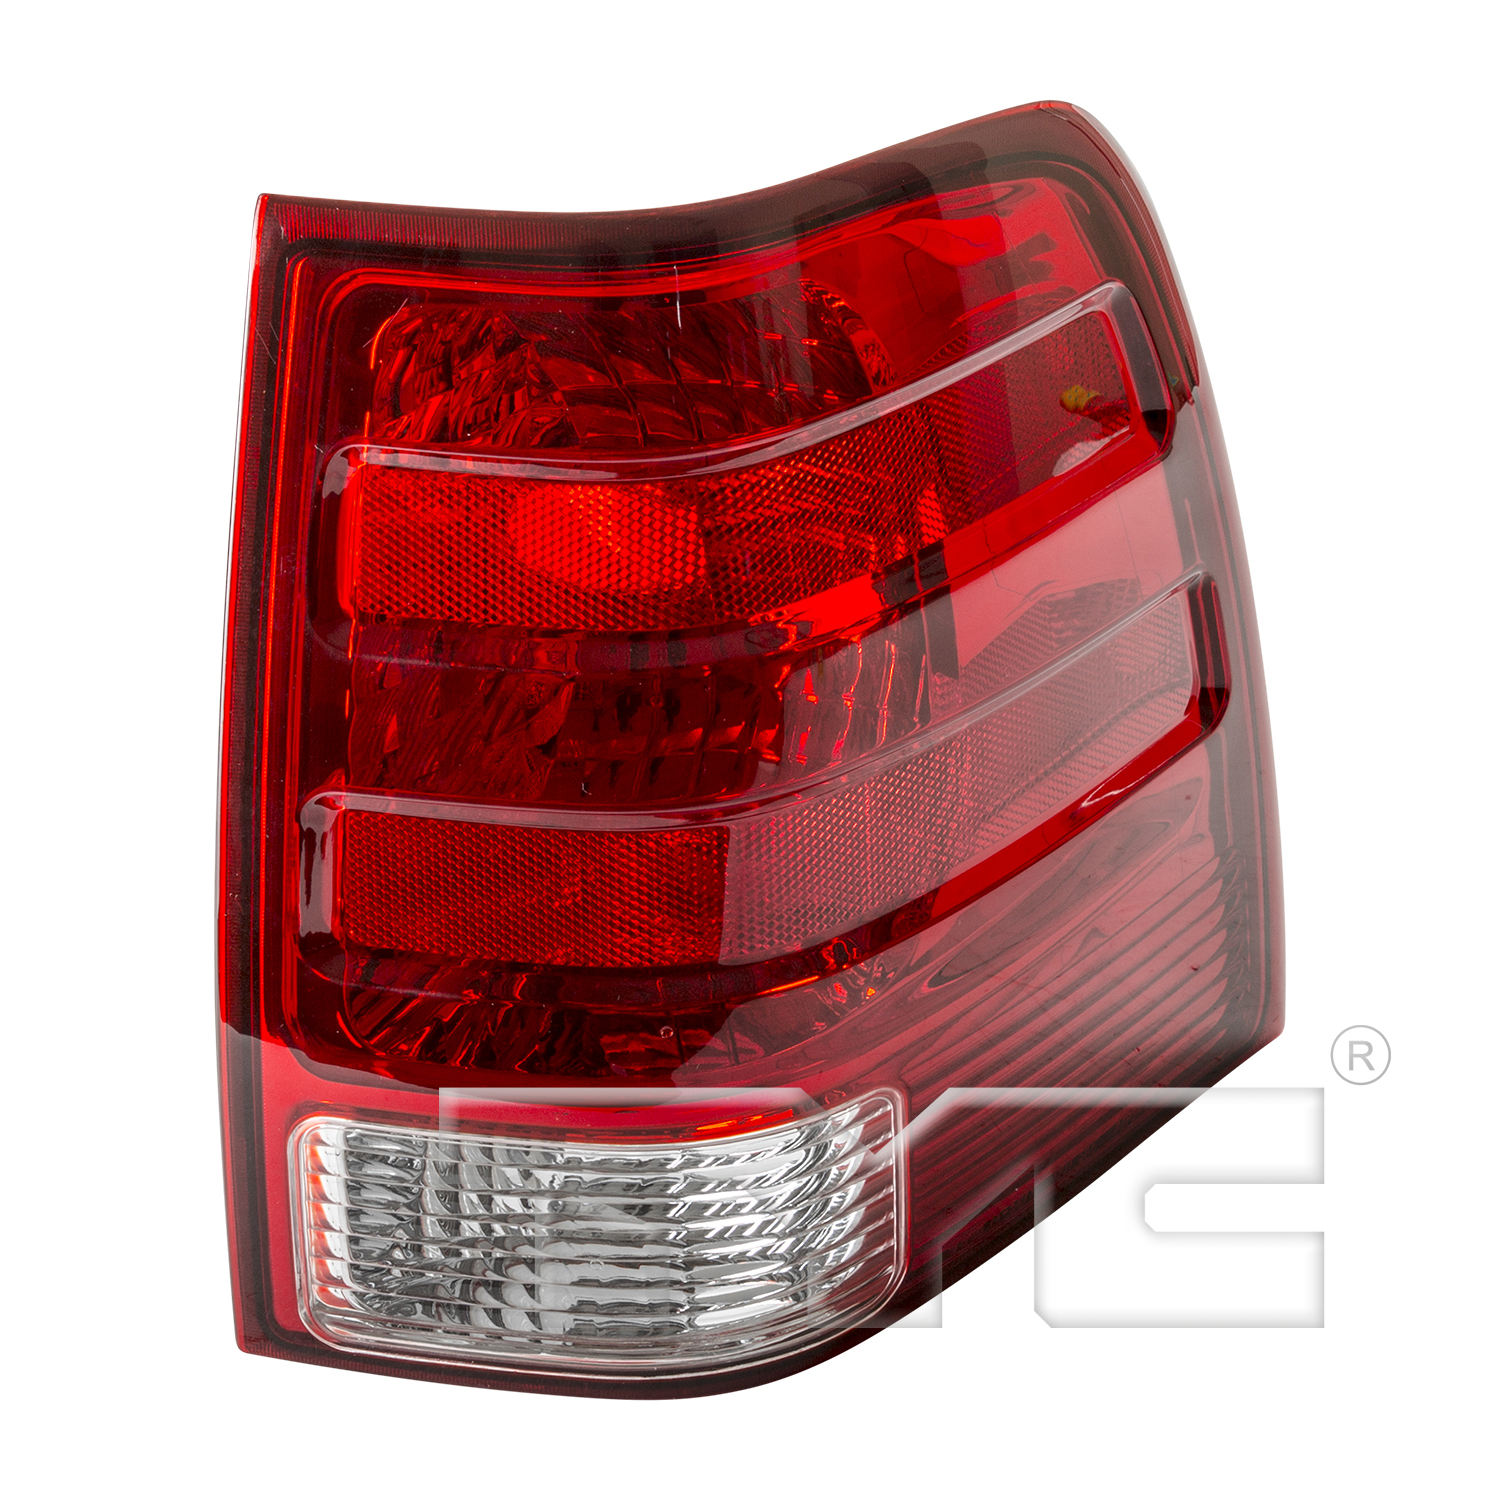 Aftermarket TAILLIGHTS for FORD - EXPEDITION, EXPEDITION,03-06,RT Taillamp assy